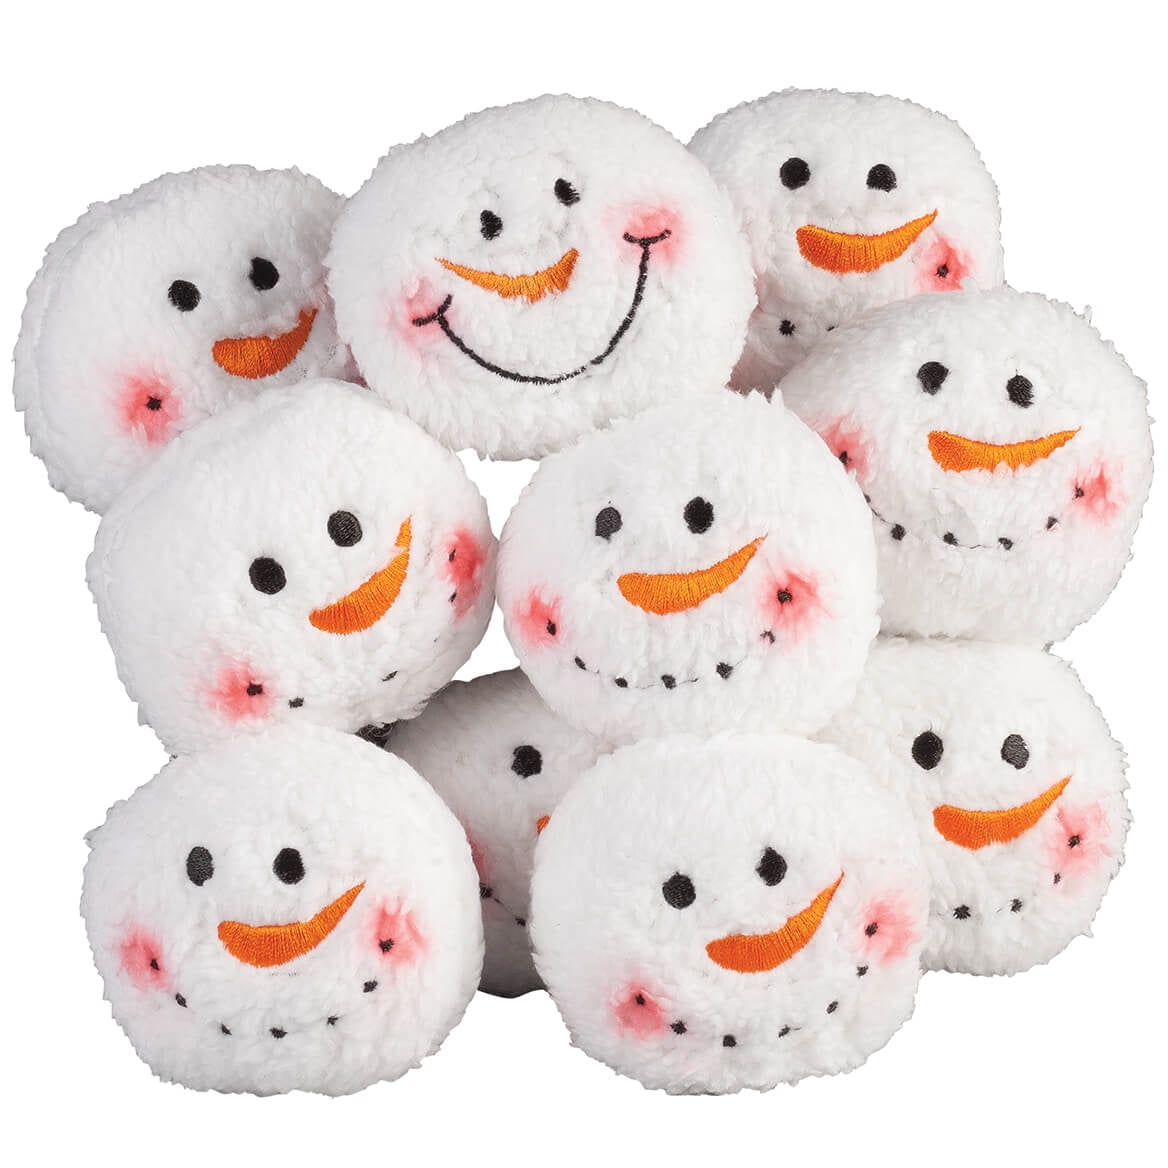 Details about   Indoor Snowballs Fight Plush Soft 10 Count Fake Snowball Ball Game or decoration 